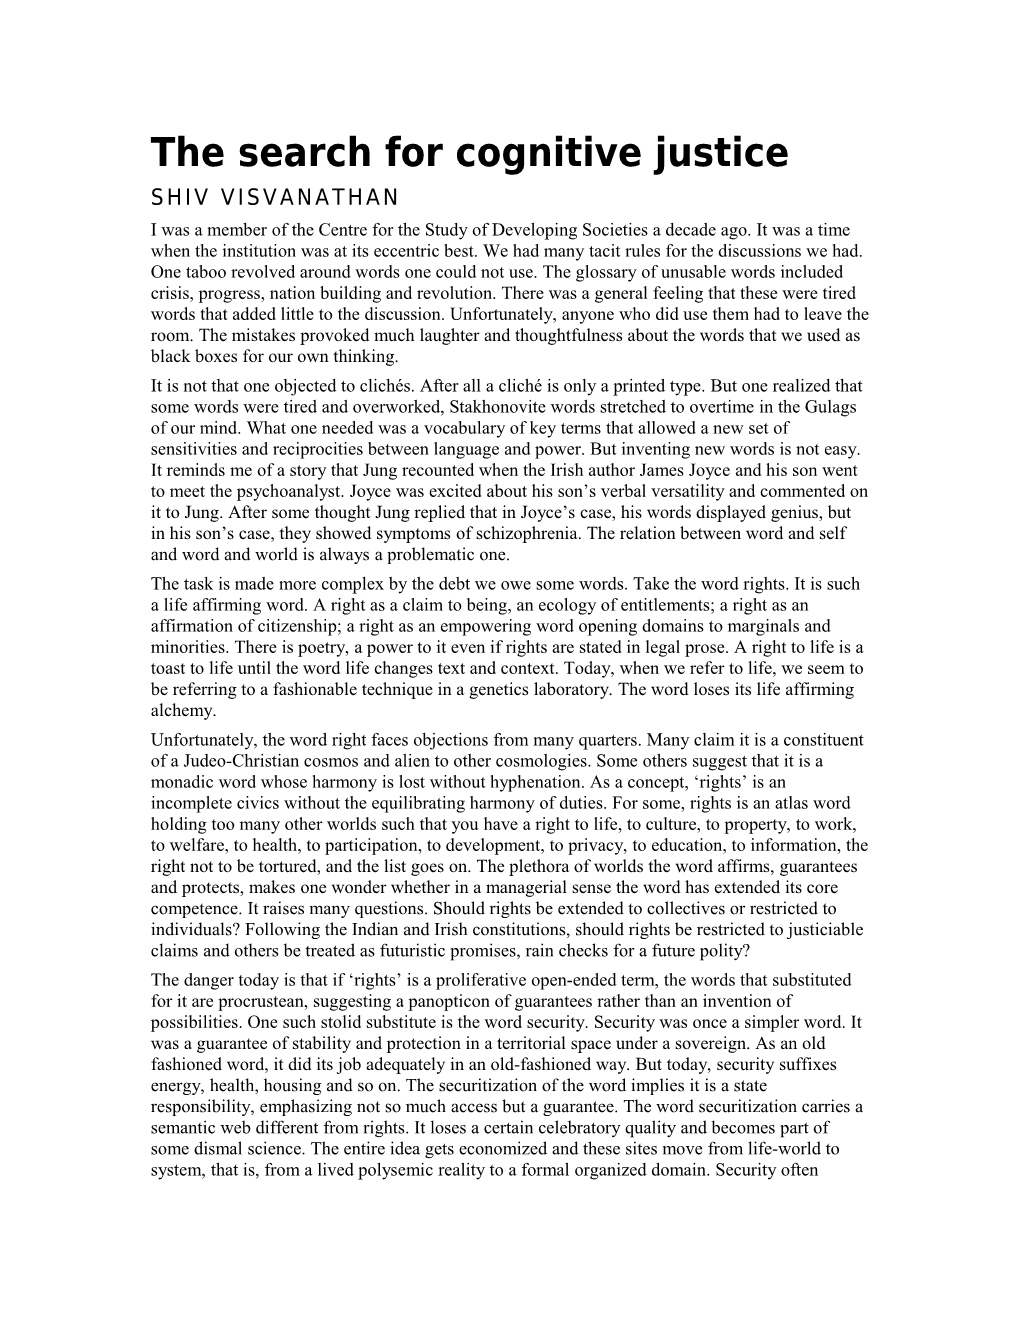 The Search for Cognitive Justice